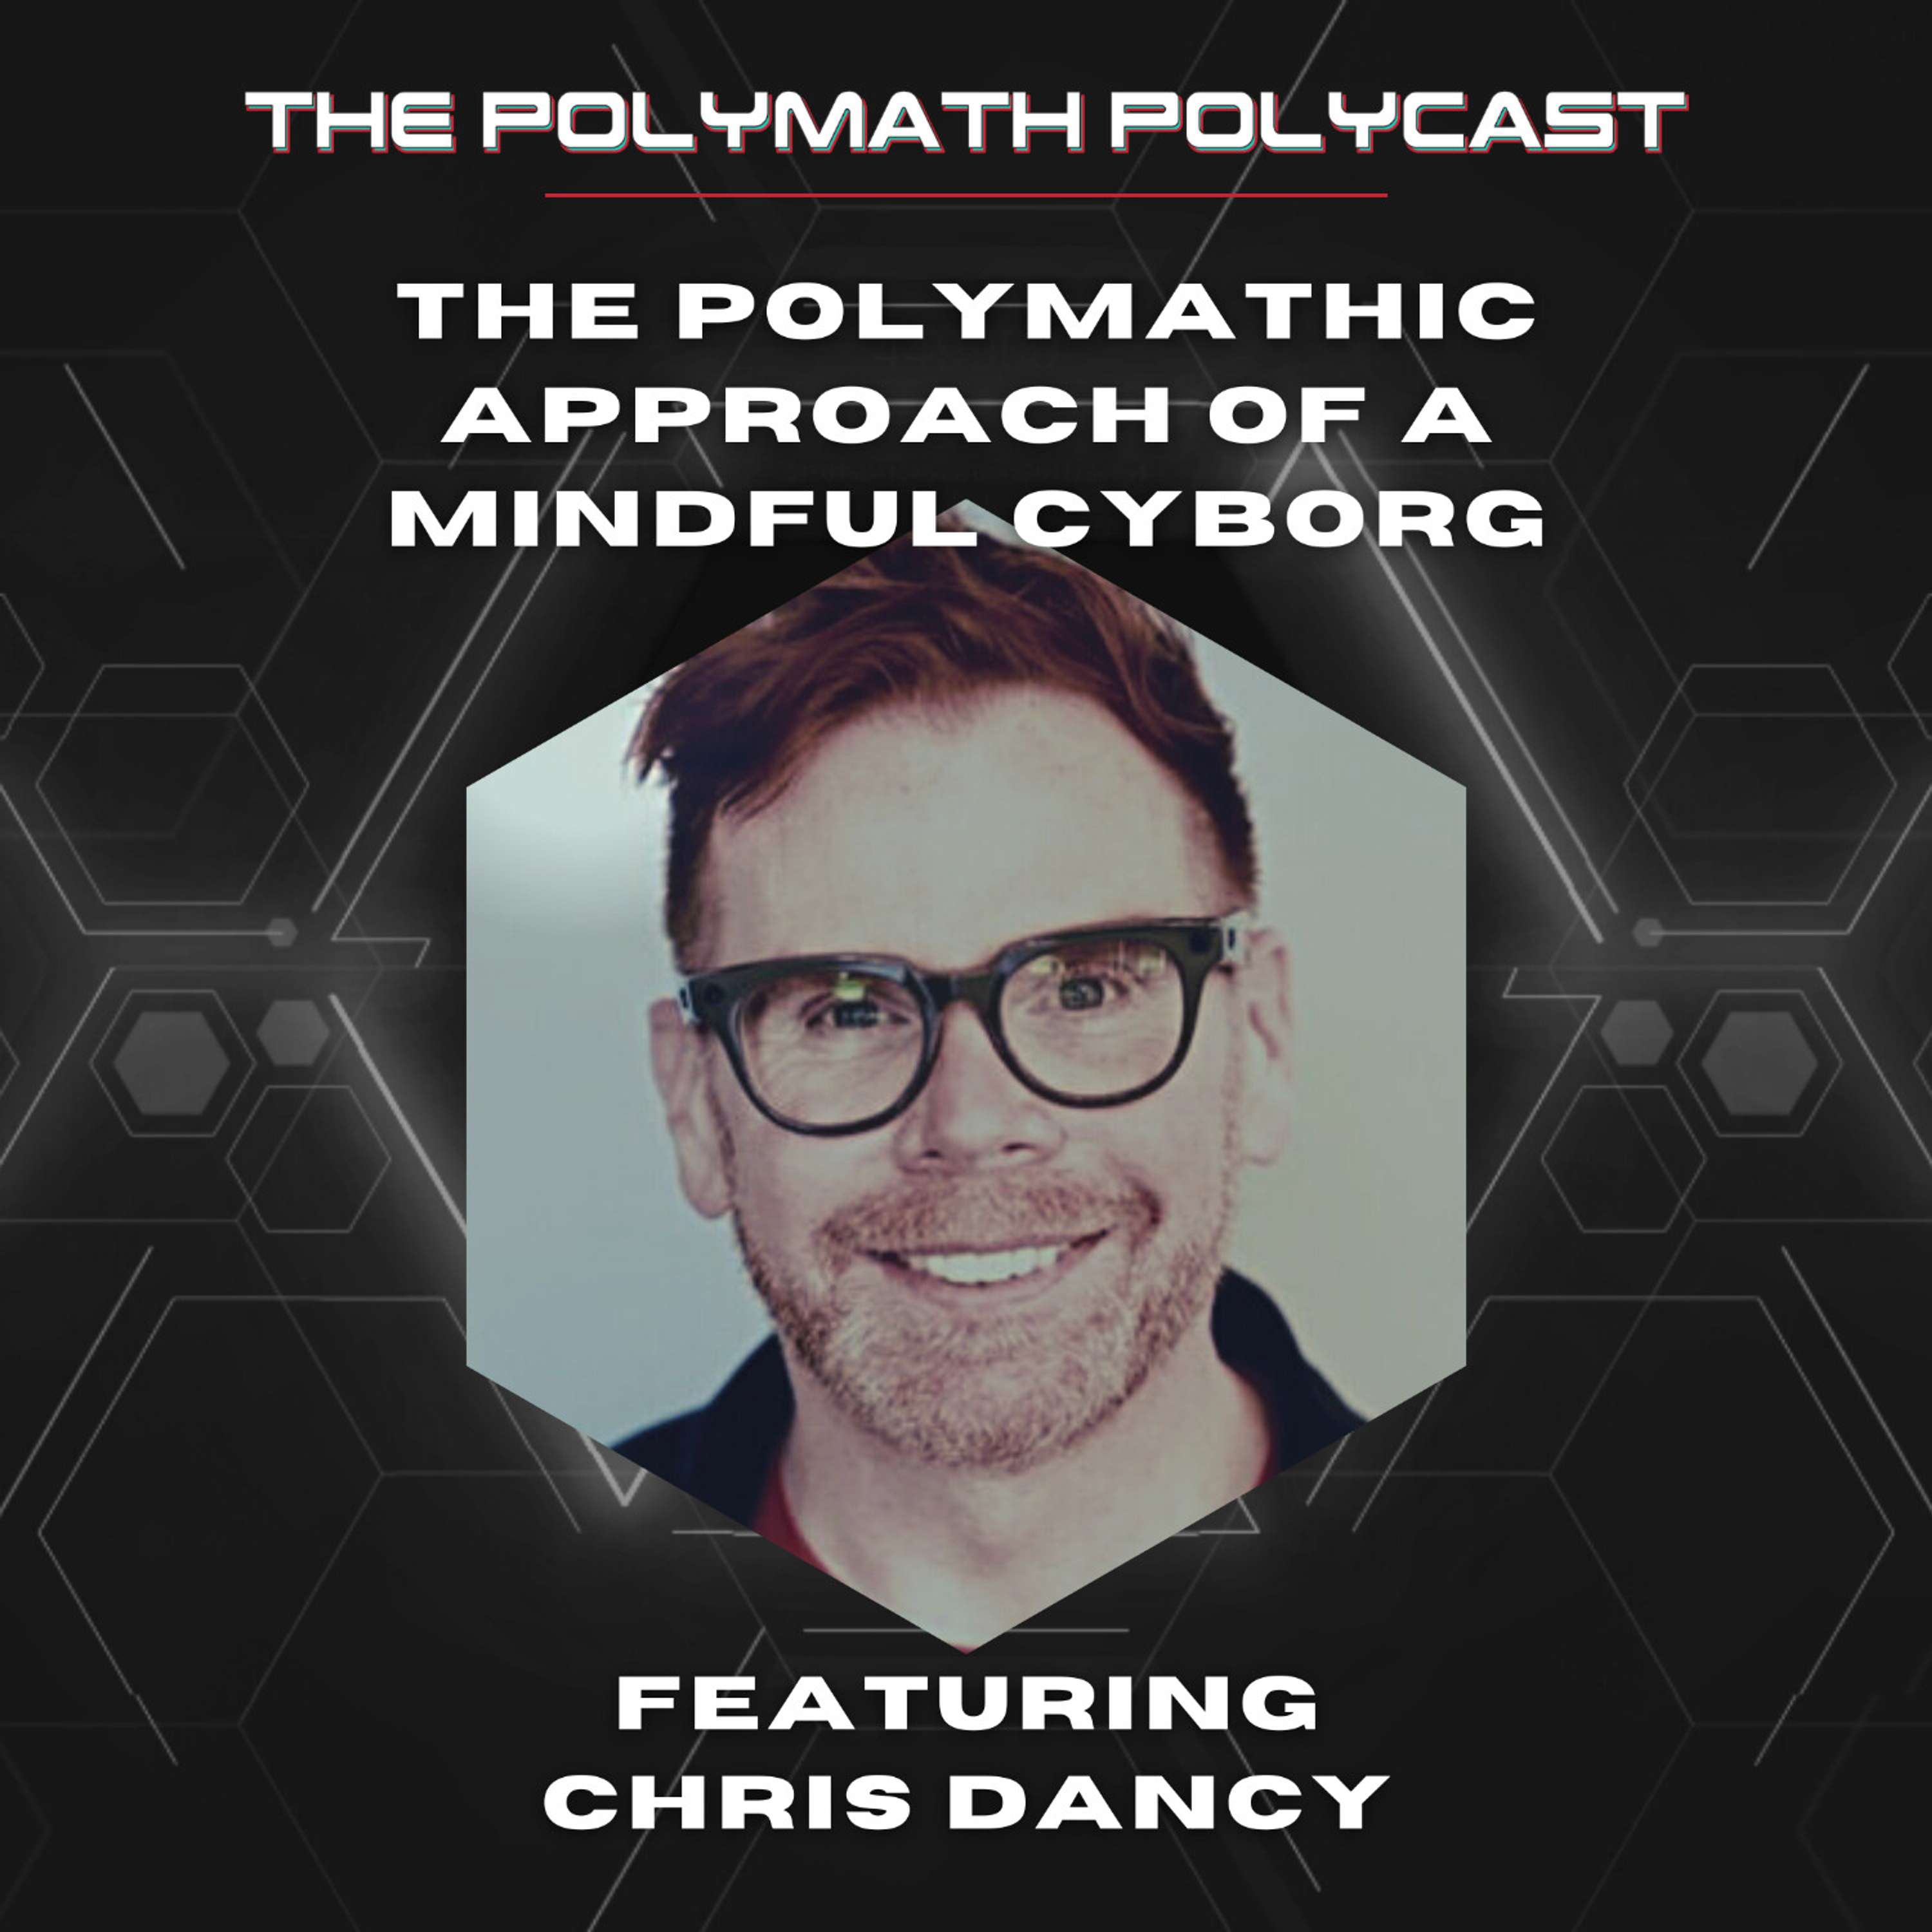 The Polymathic Approach of a Mindful Cyborg with Chris Dancy [Interview]